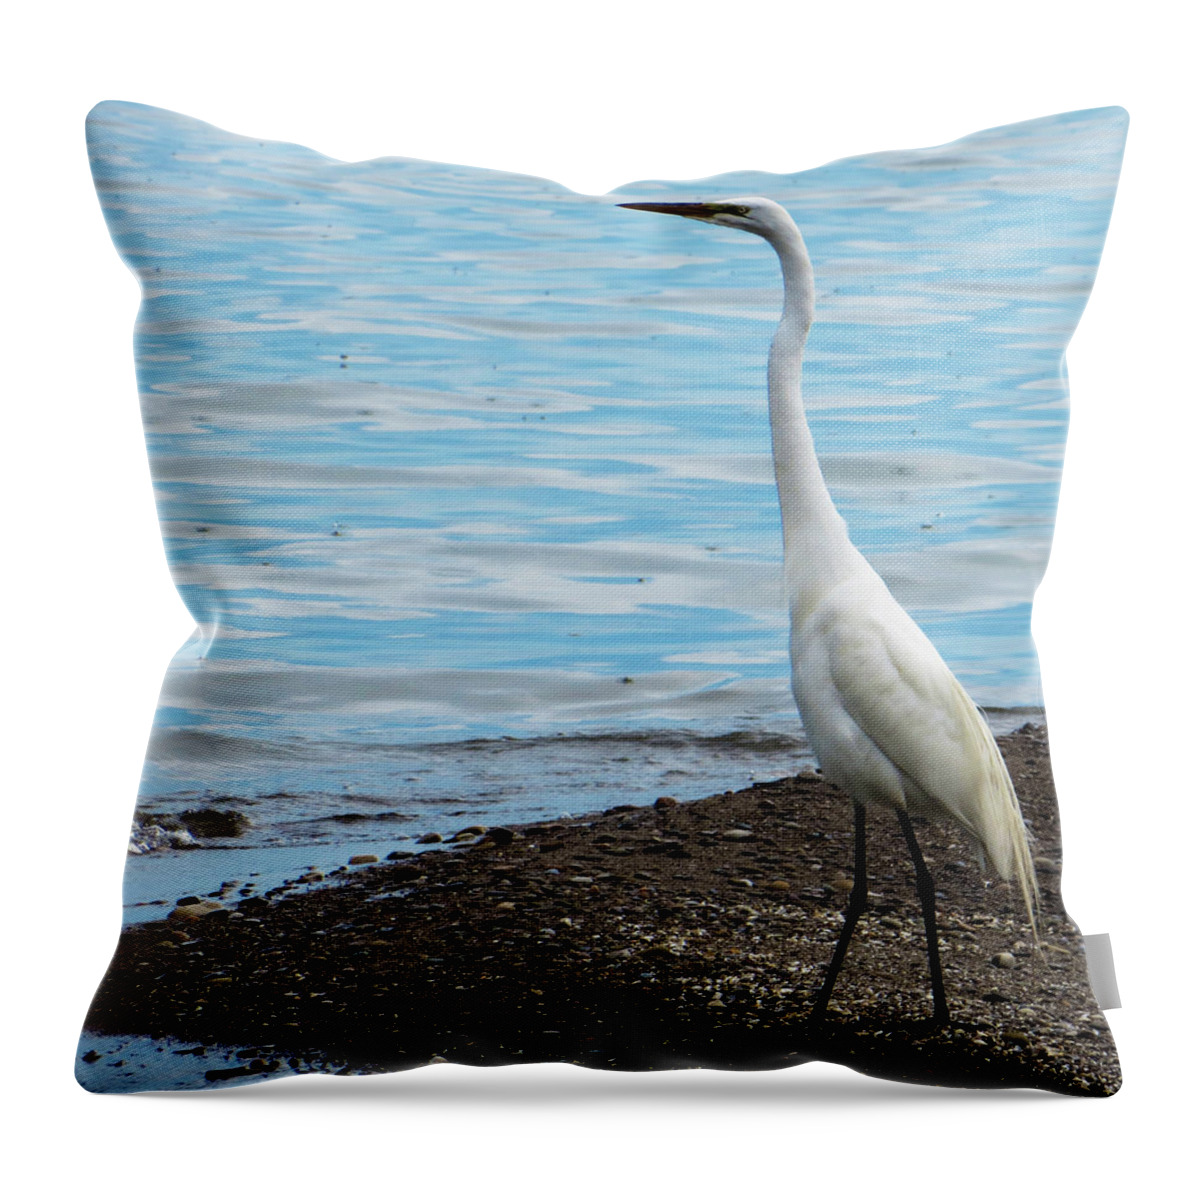 Heron Throw Pillow featuring the photograph Heron By The Beach by Shawna Rowe